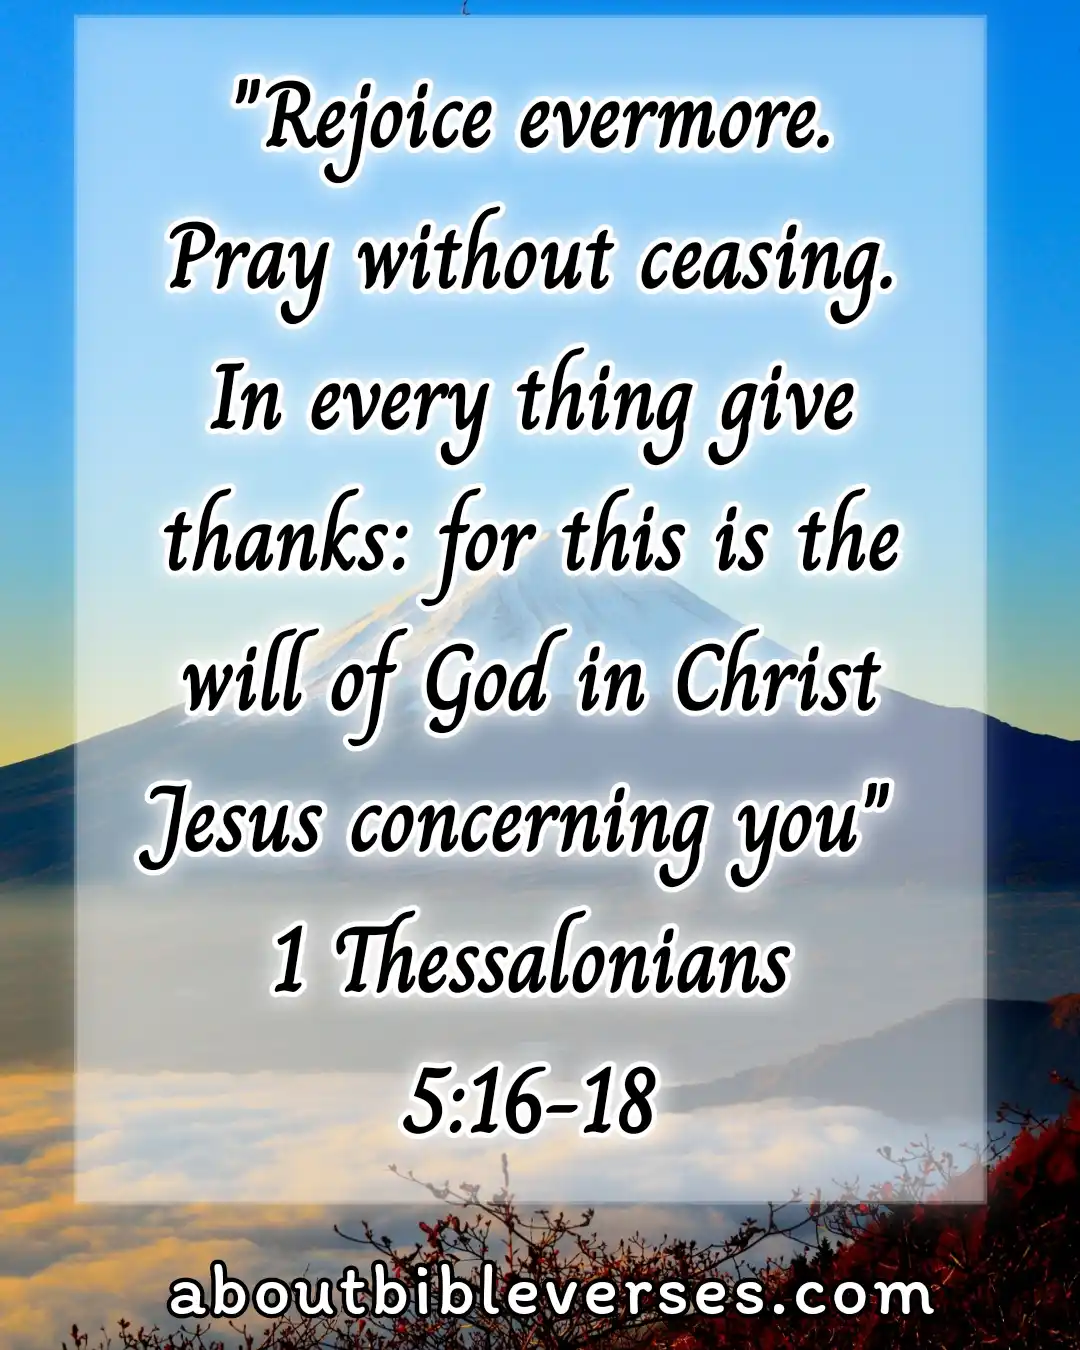 Bible Verses About Praying With Wrong Motive (1 Thessalonians 5:16-18)